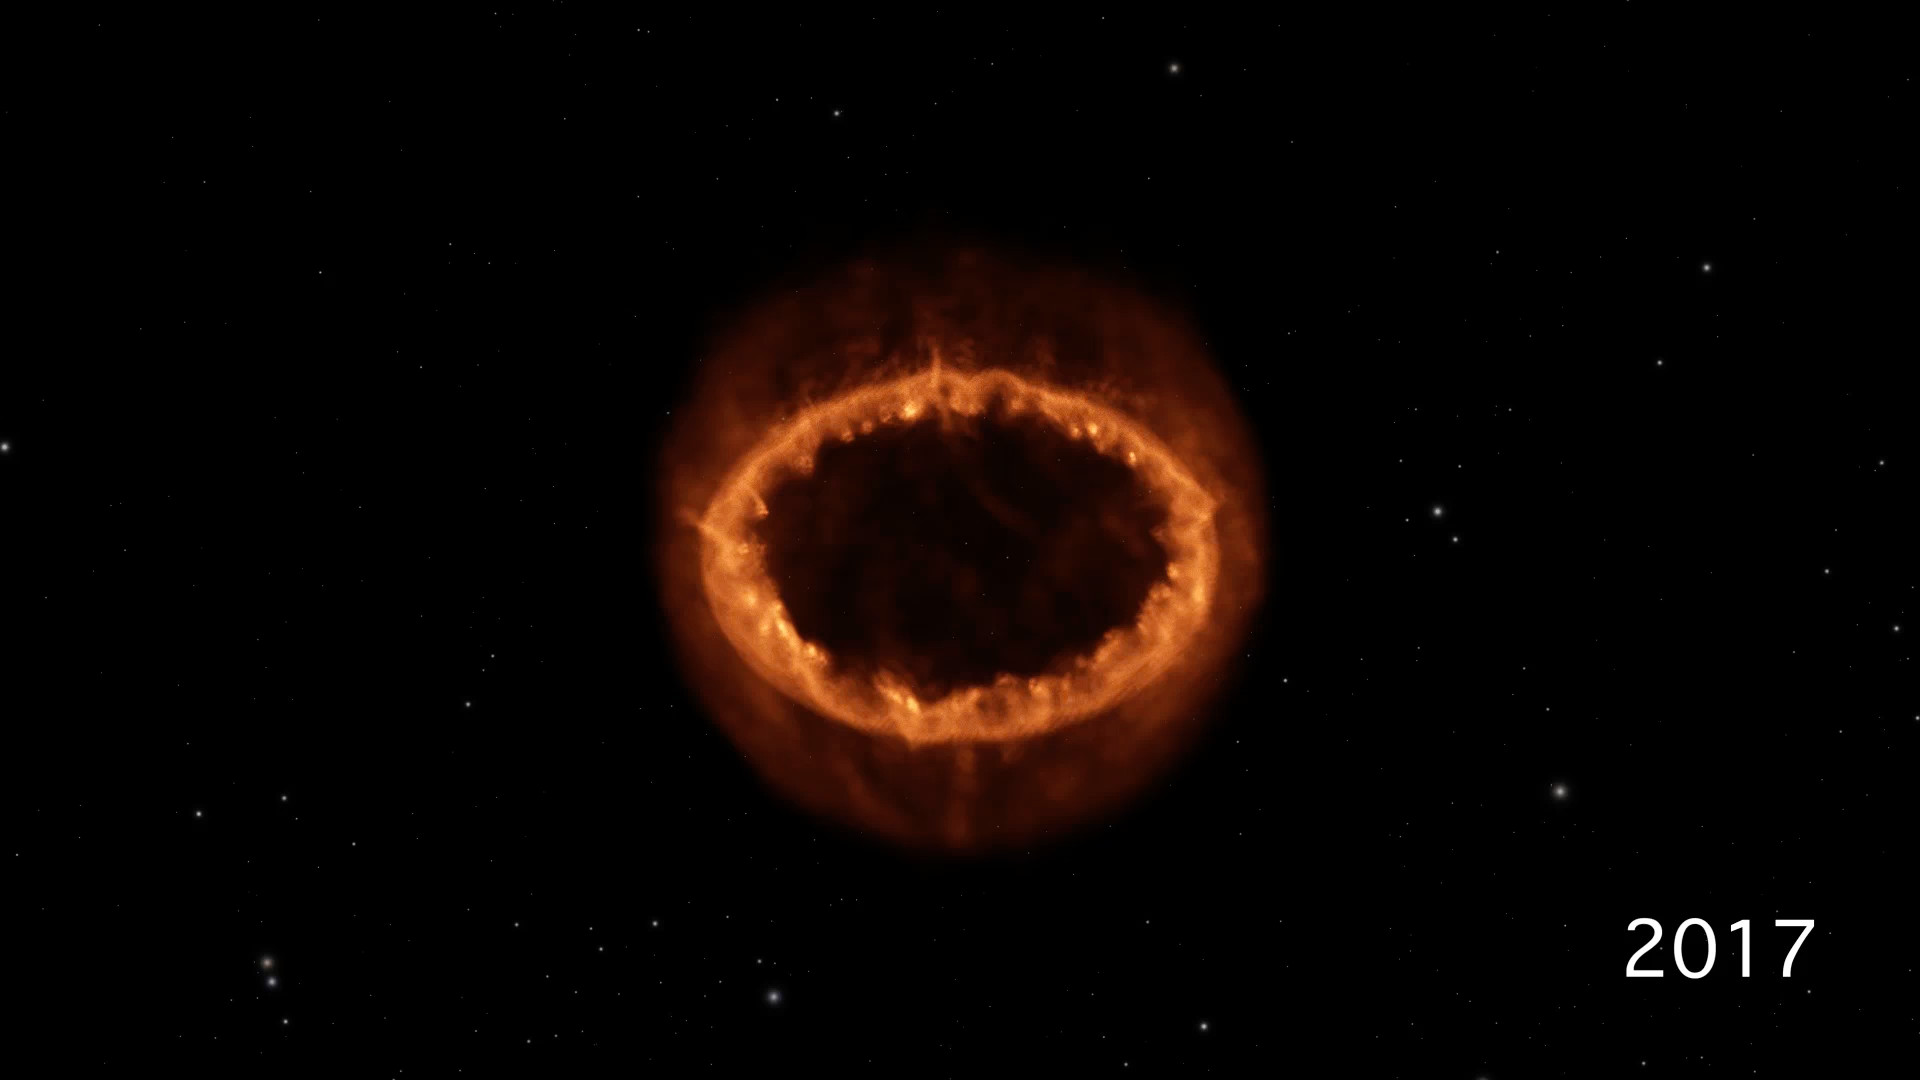 This scientific visualization shows the development of Supernova 1987A, from the initial explosion observed three decades ago to the luminous ring of material we see today.